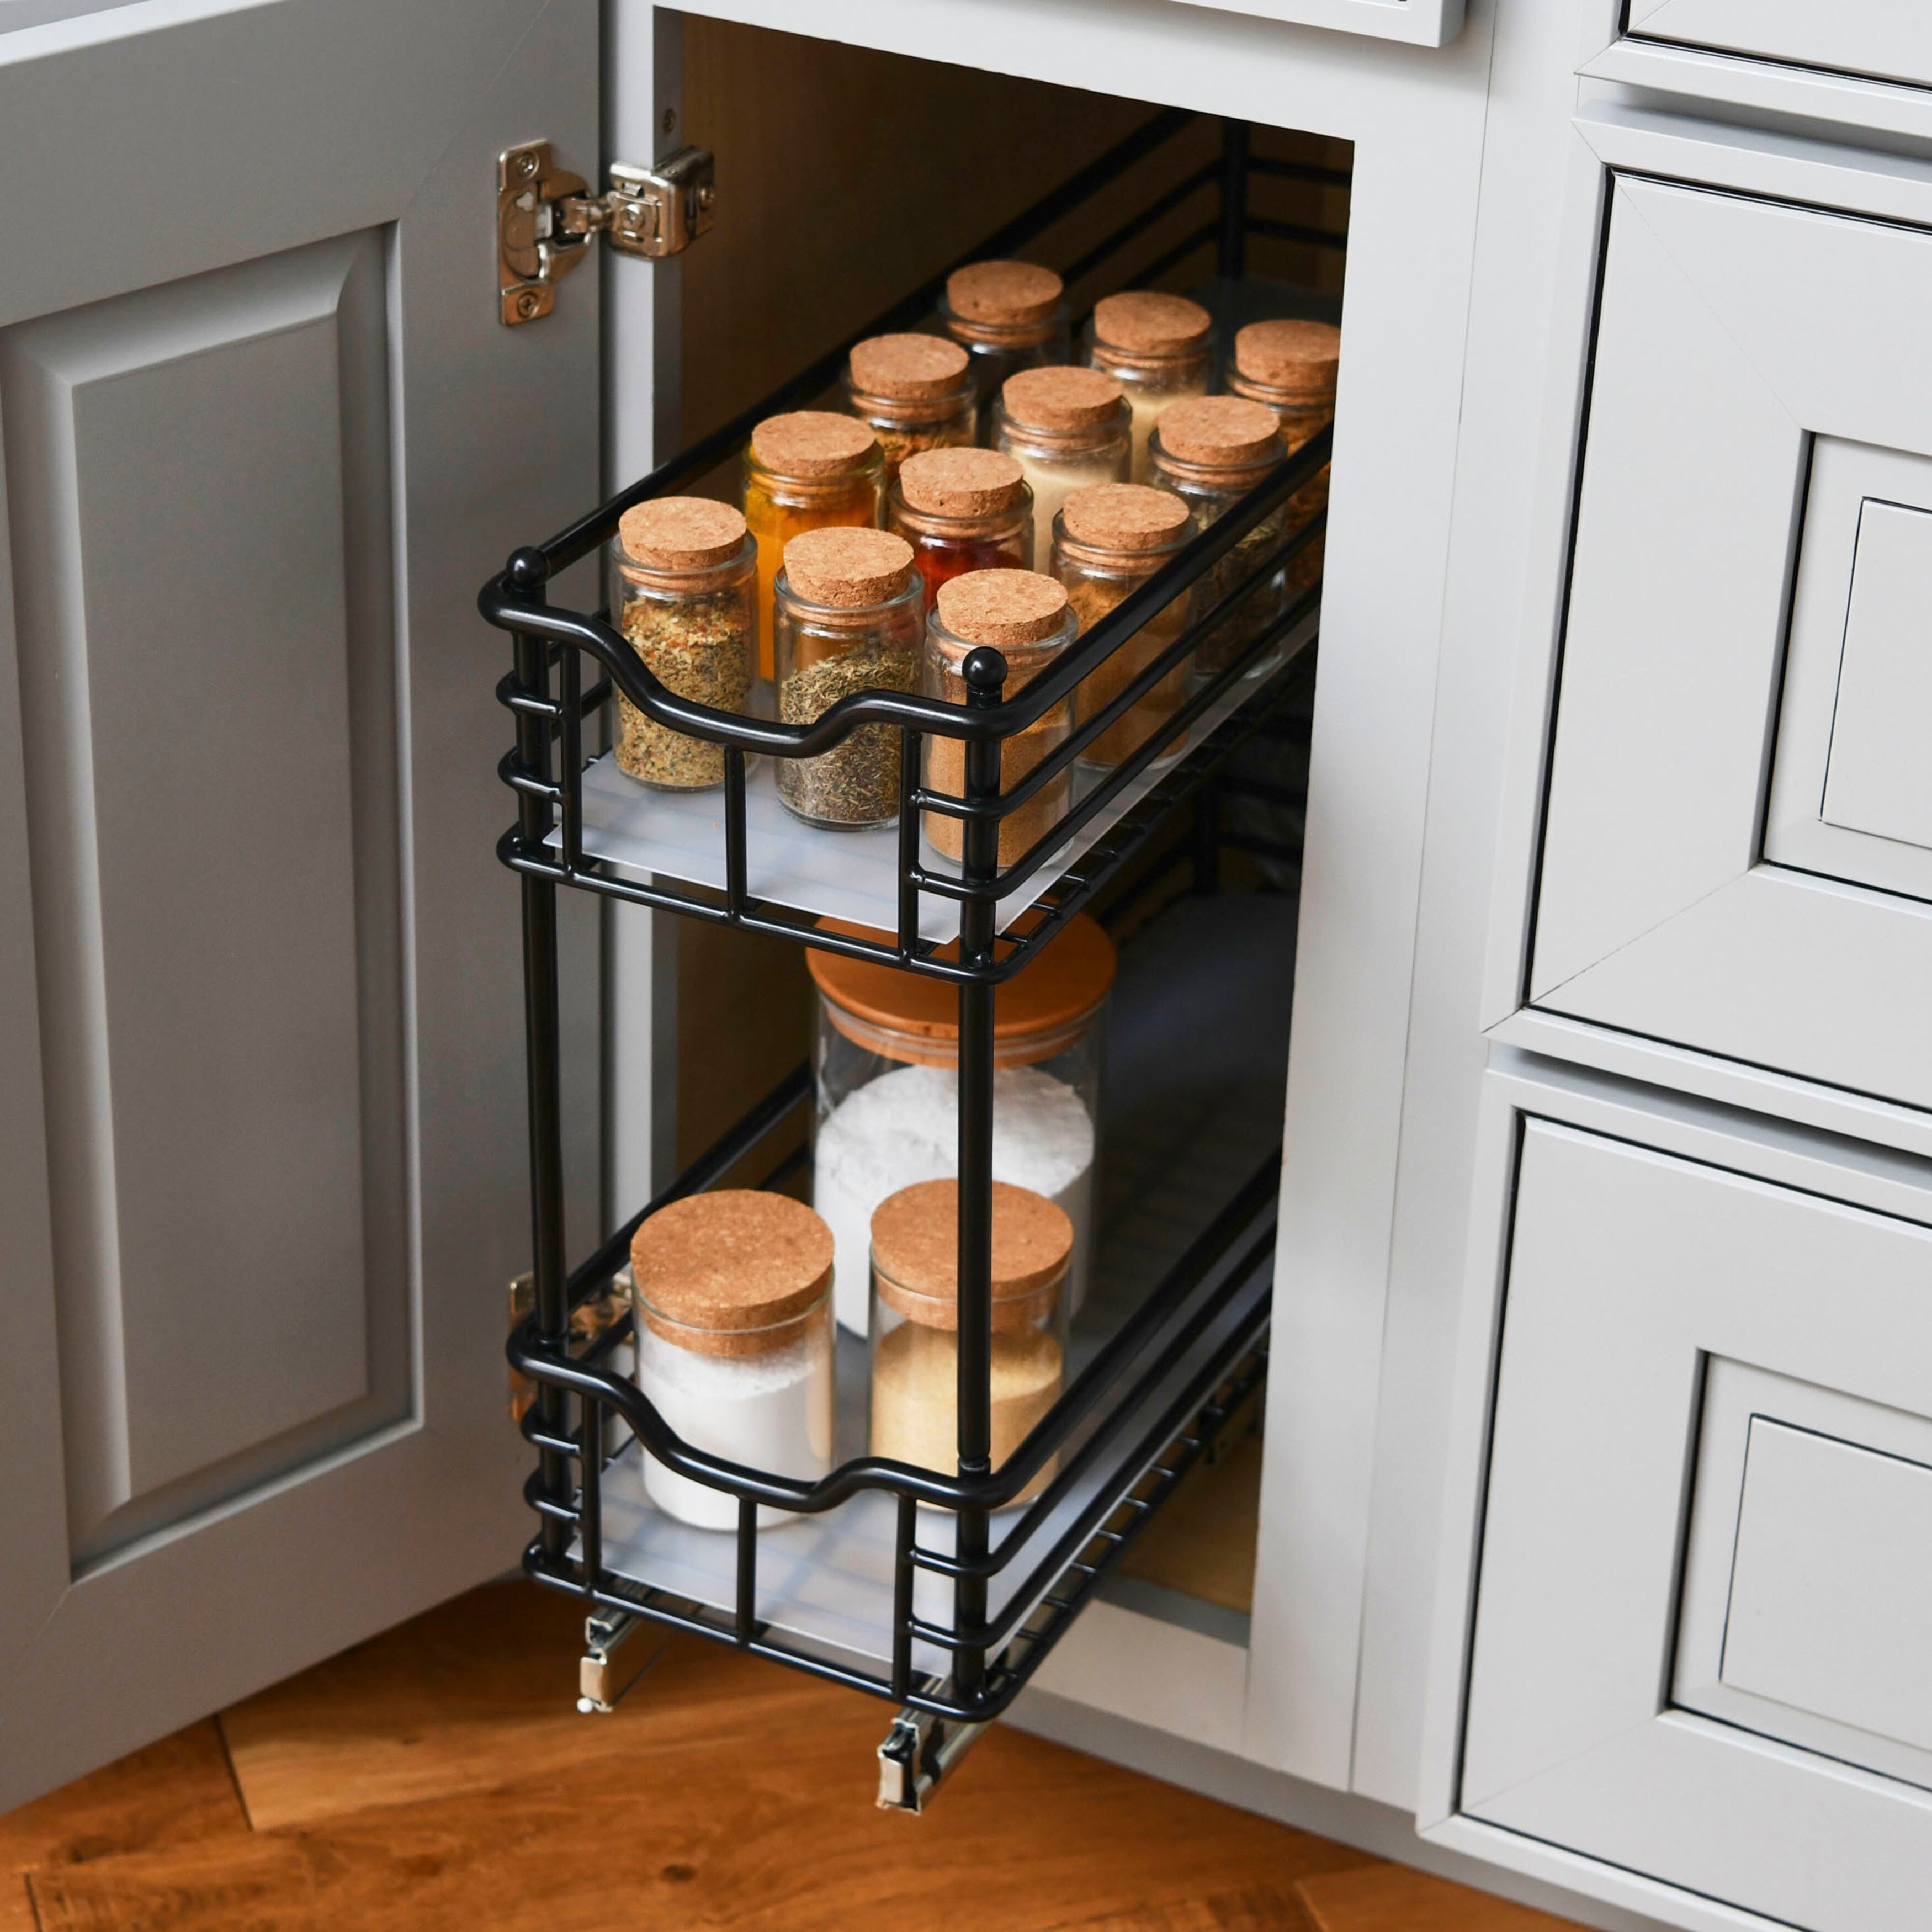 https://ak1.ostkcdn.com/images/products/is/images/direct/51927945773e9508b6a9791b0004a071a9419eda/Narrow-Sliding-Cabinet-Organizer%2C-Two-Tier-Organizer%2C-Matte-Black%2C-Great-for-Slim-Cabinets-in-Kitchen%2C-Bathroom-and-More.jpg